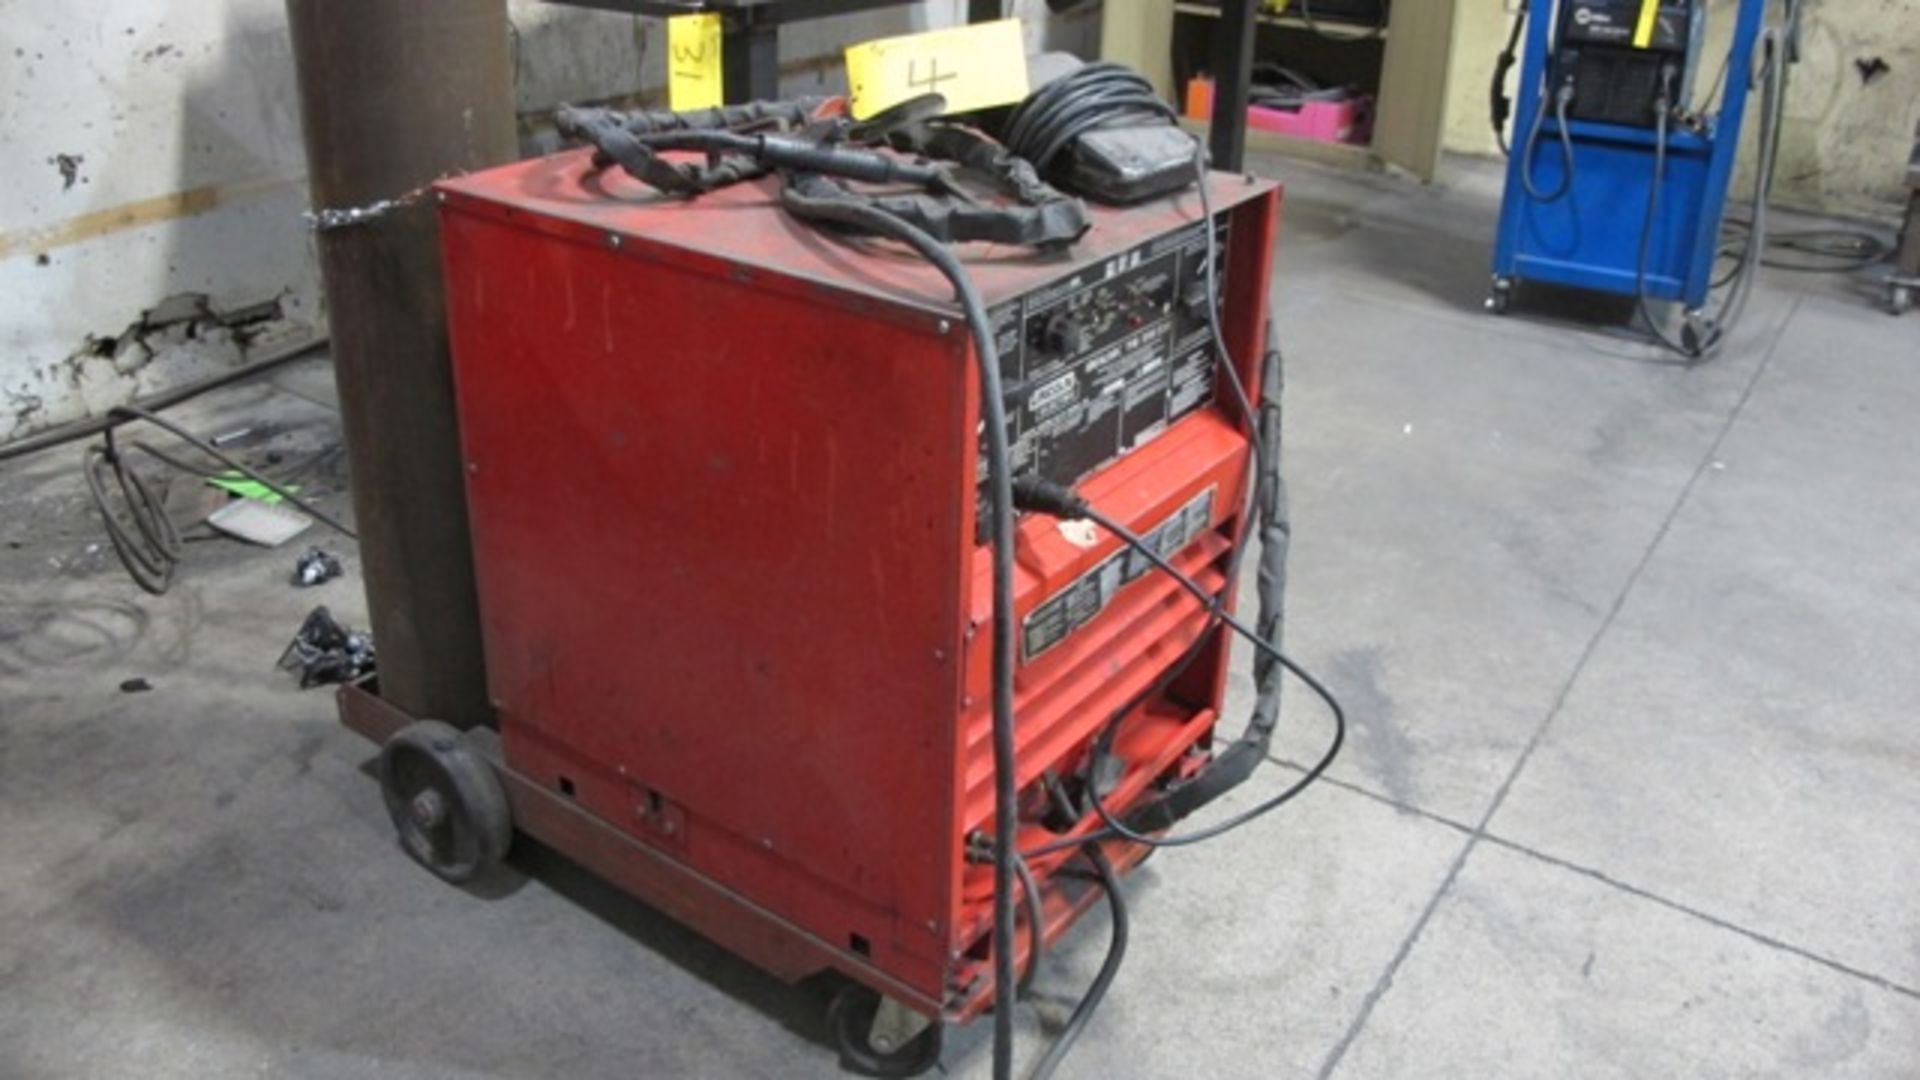 LINCOLN ELECTRIC IDEALARC TIG 250/250 WELDER - Image 2 of 3